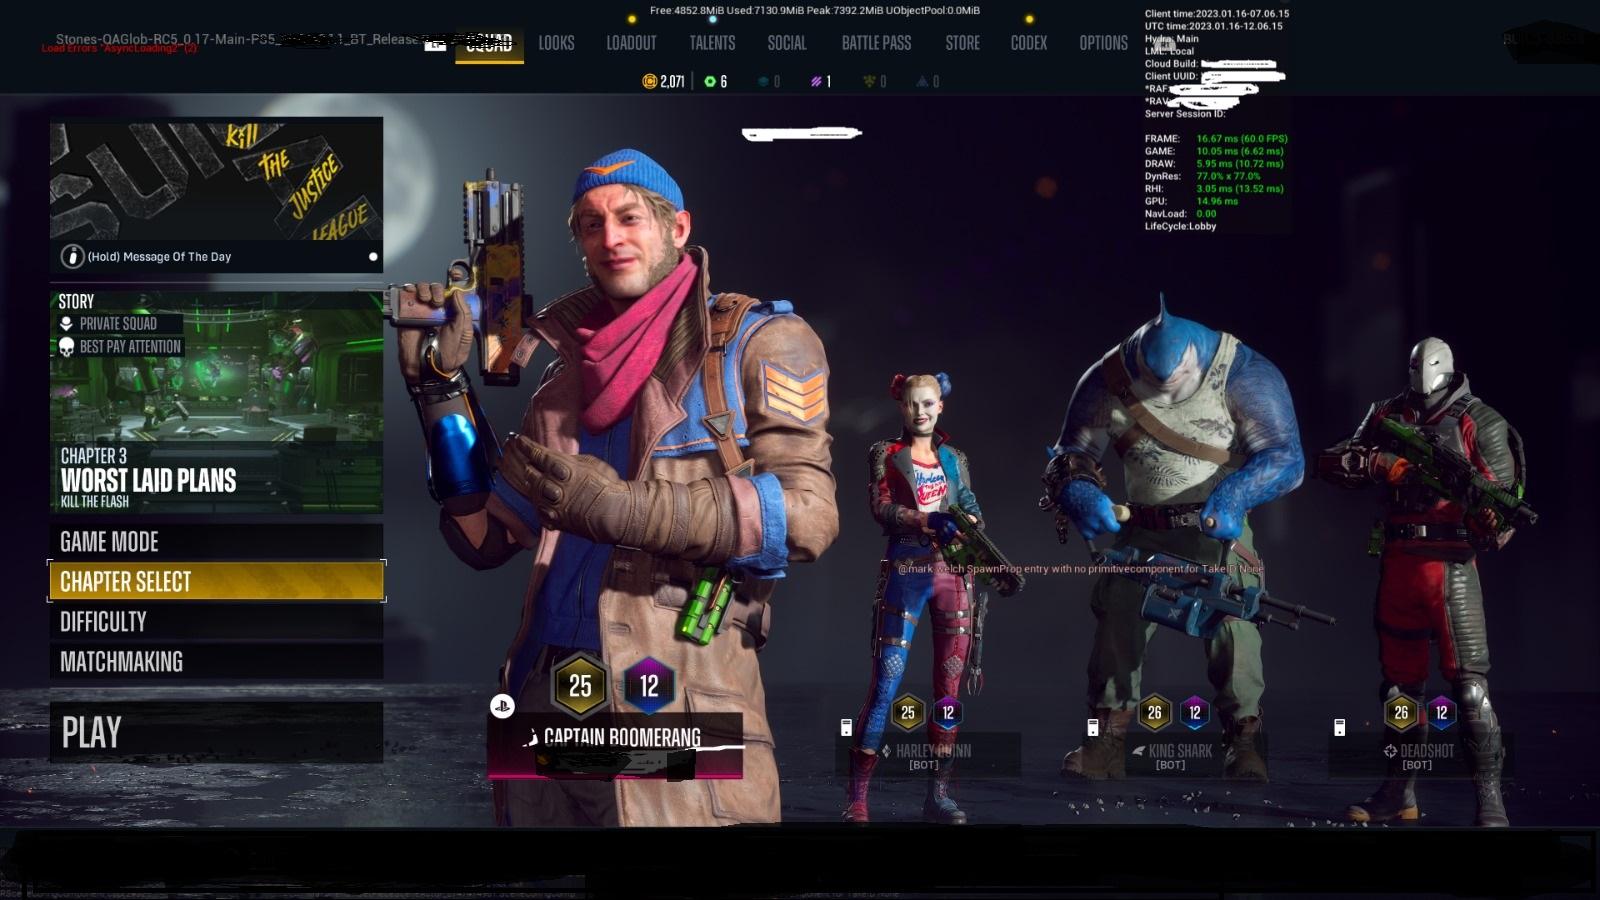 Suicide Squad’s leaked battle pass and in-game store triggers anger among fans